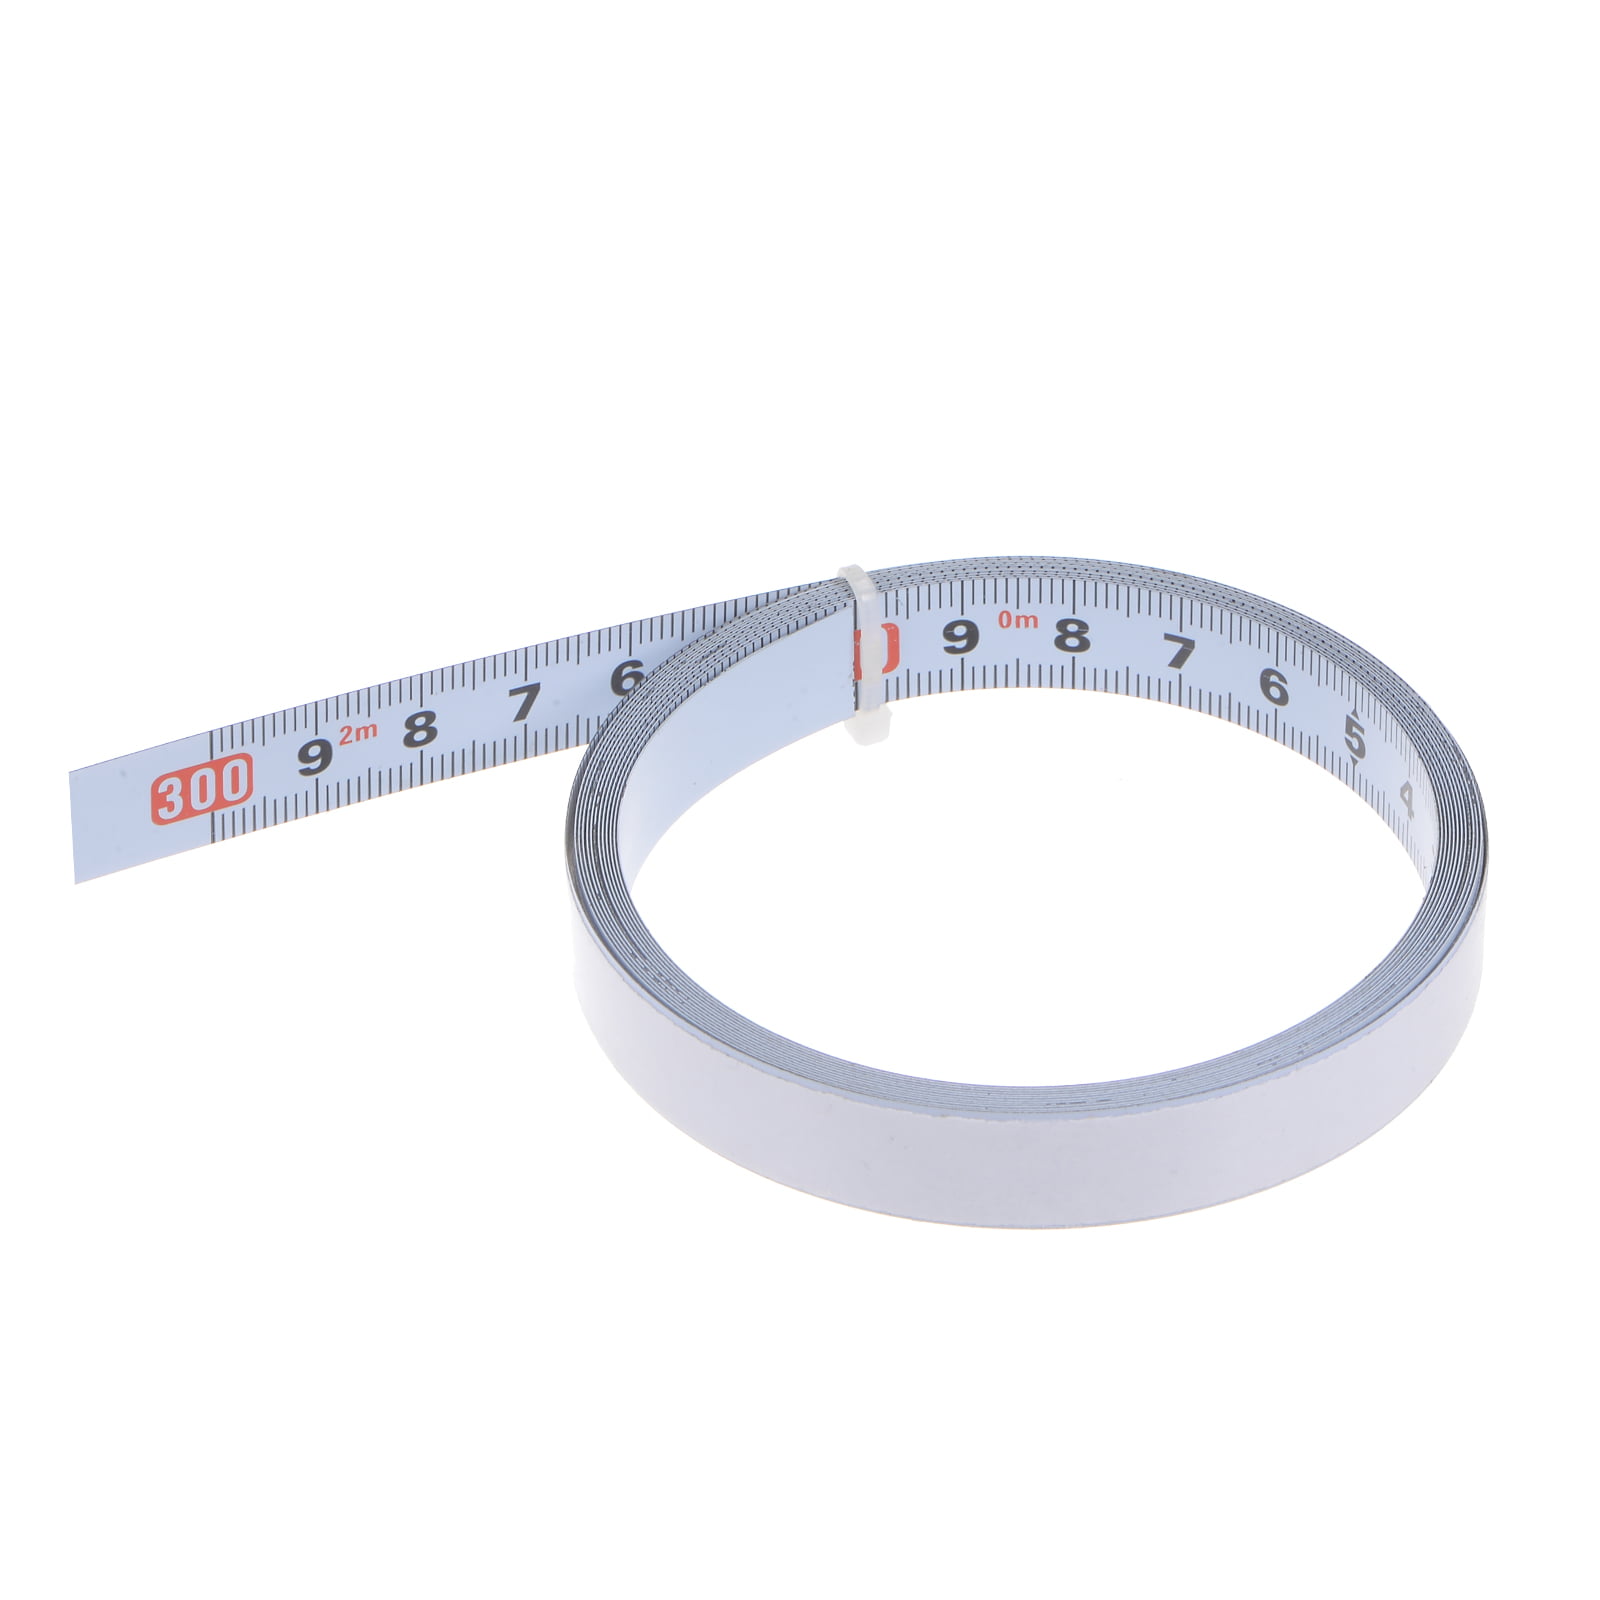 Self Adhesive Tape Measure 300cm Metric Right to Left Read Measuring Tape  Steel Sticky Ruler, White